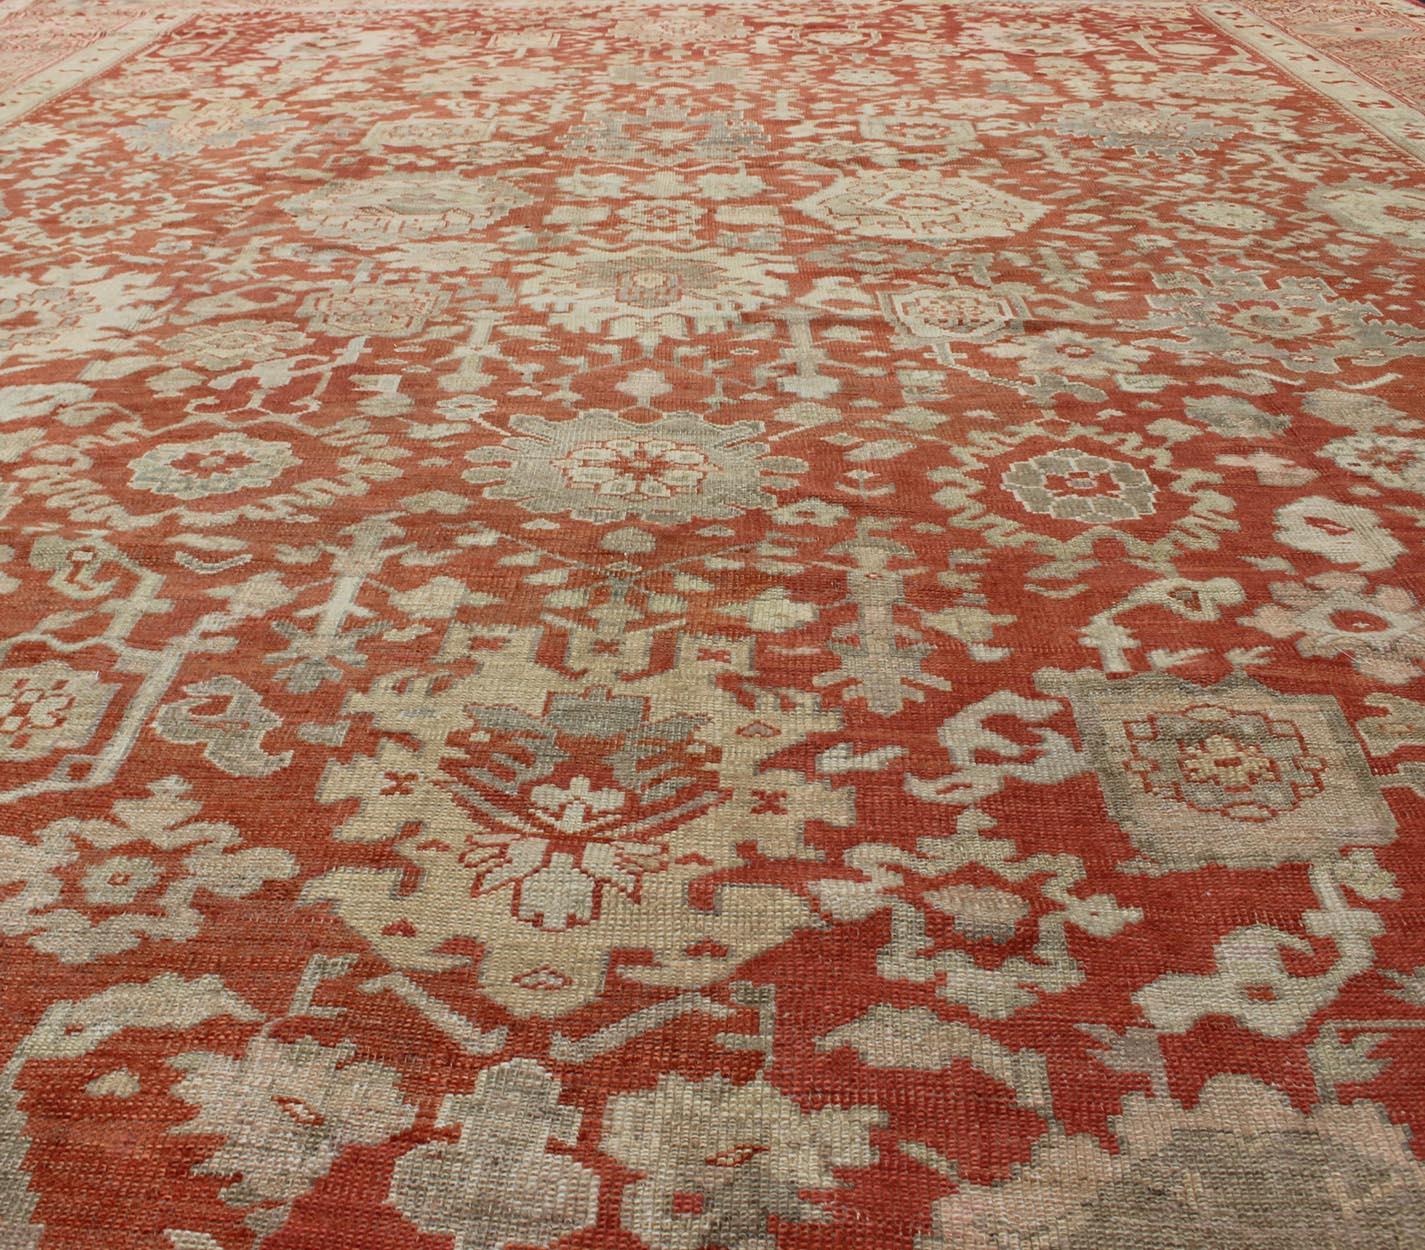 Large Antique Oushak Rug with Floral Design in Soft Orange, Taupe, Light Green In Good Condition For Sale In Atlanta, GA